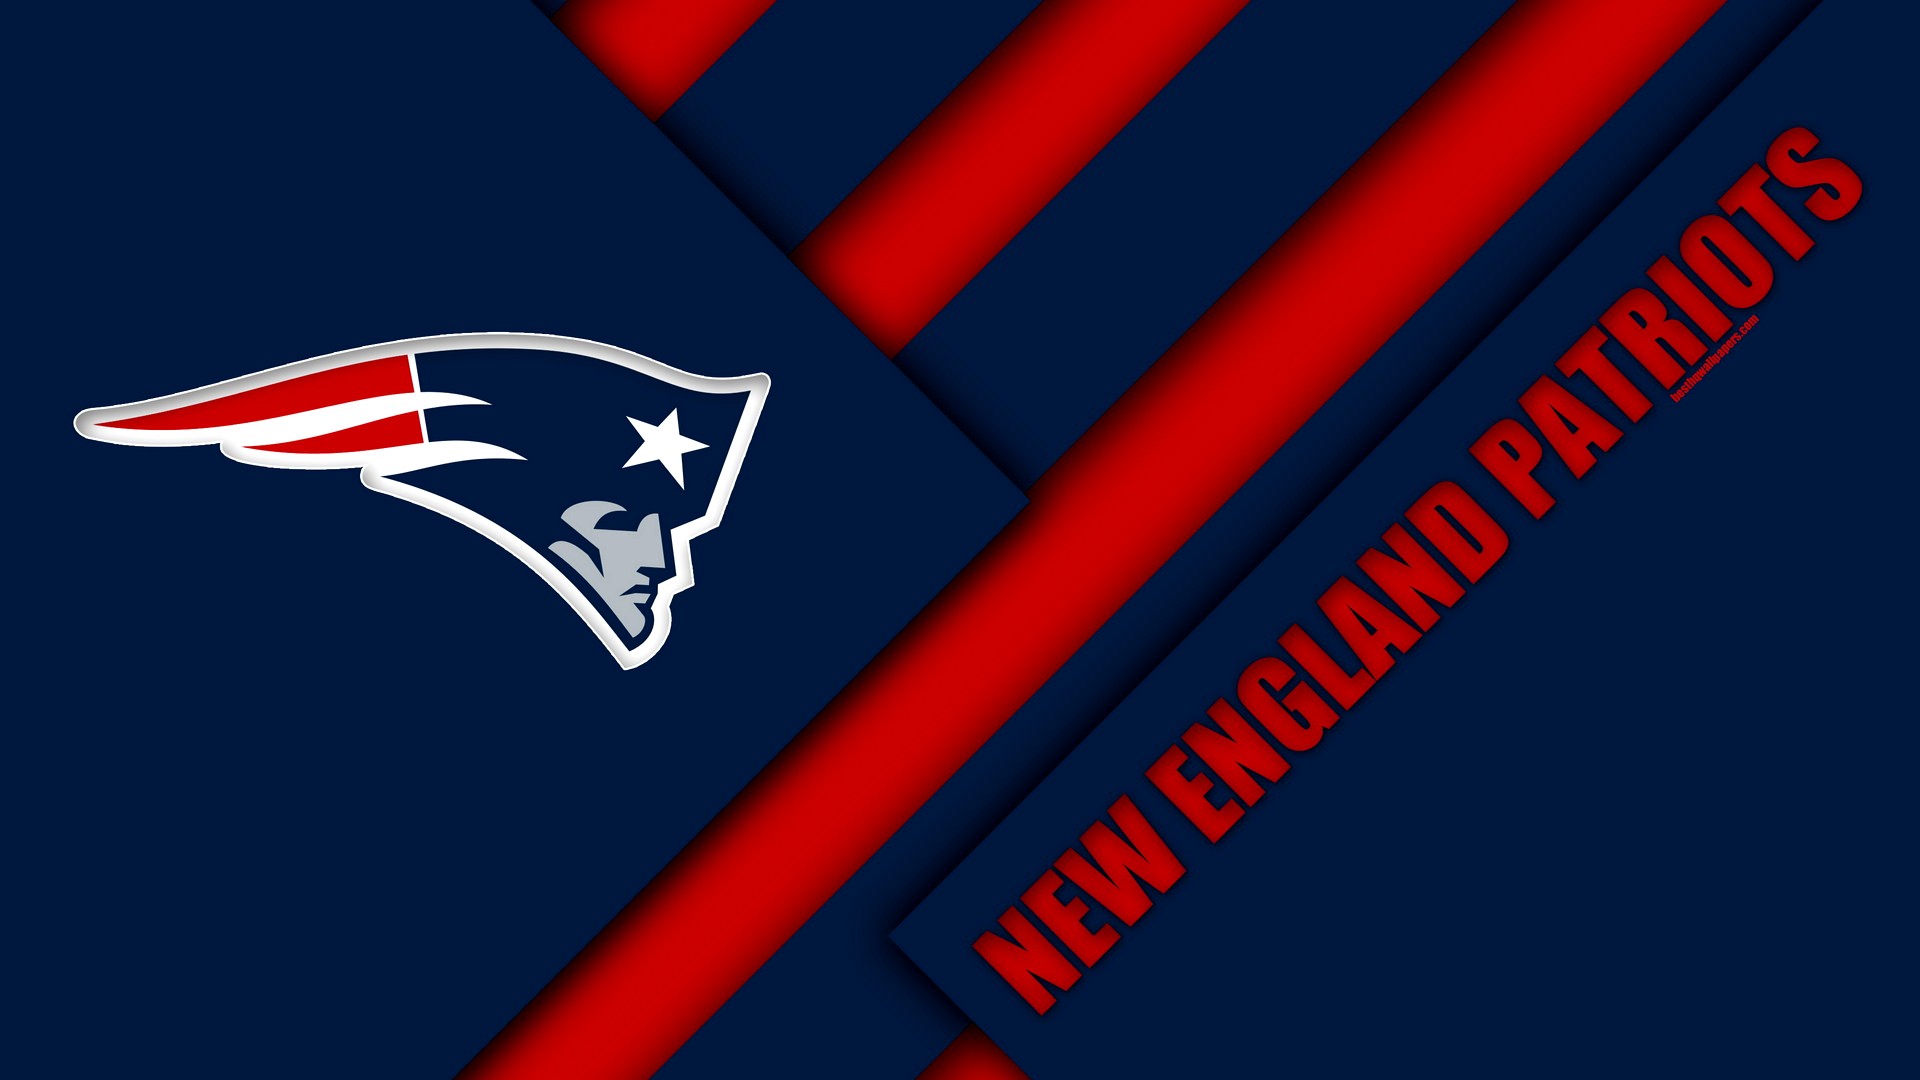 NE Patriots Wallpaper HD Laptop with high-resolution 1920x1080 pixel. You can use and set as wallpaper for Notebook Screensavers, Mac Wallpapers, Mobile Home Screen, iPhone or Android Phones Lock Screen